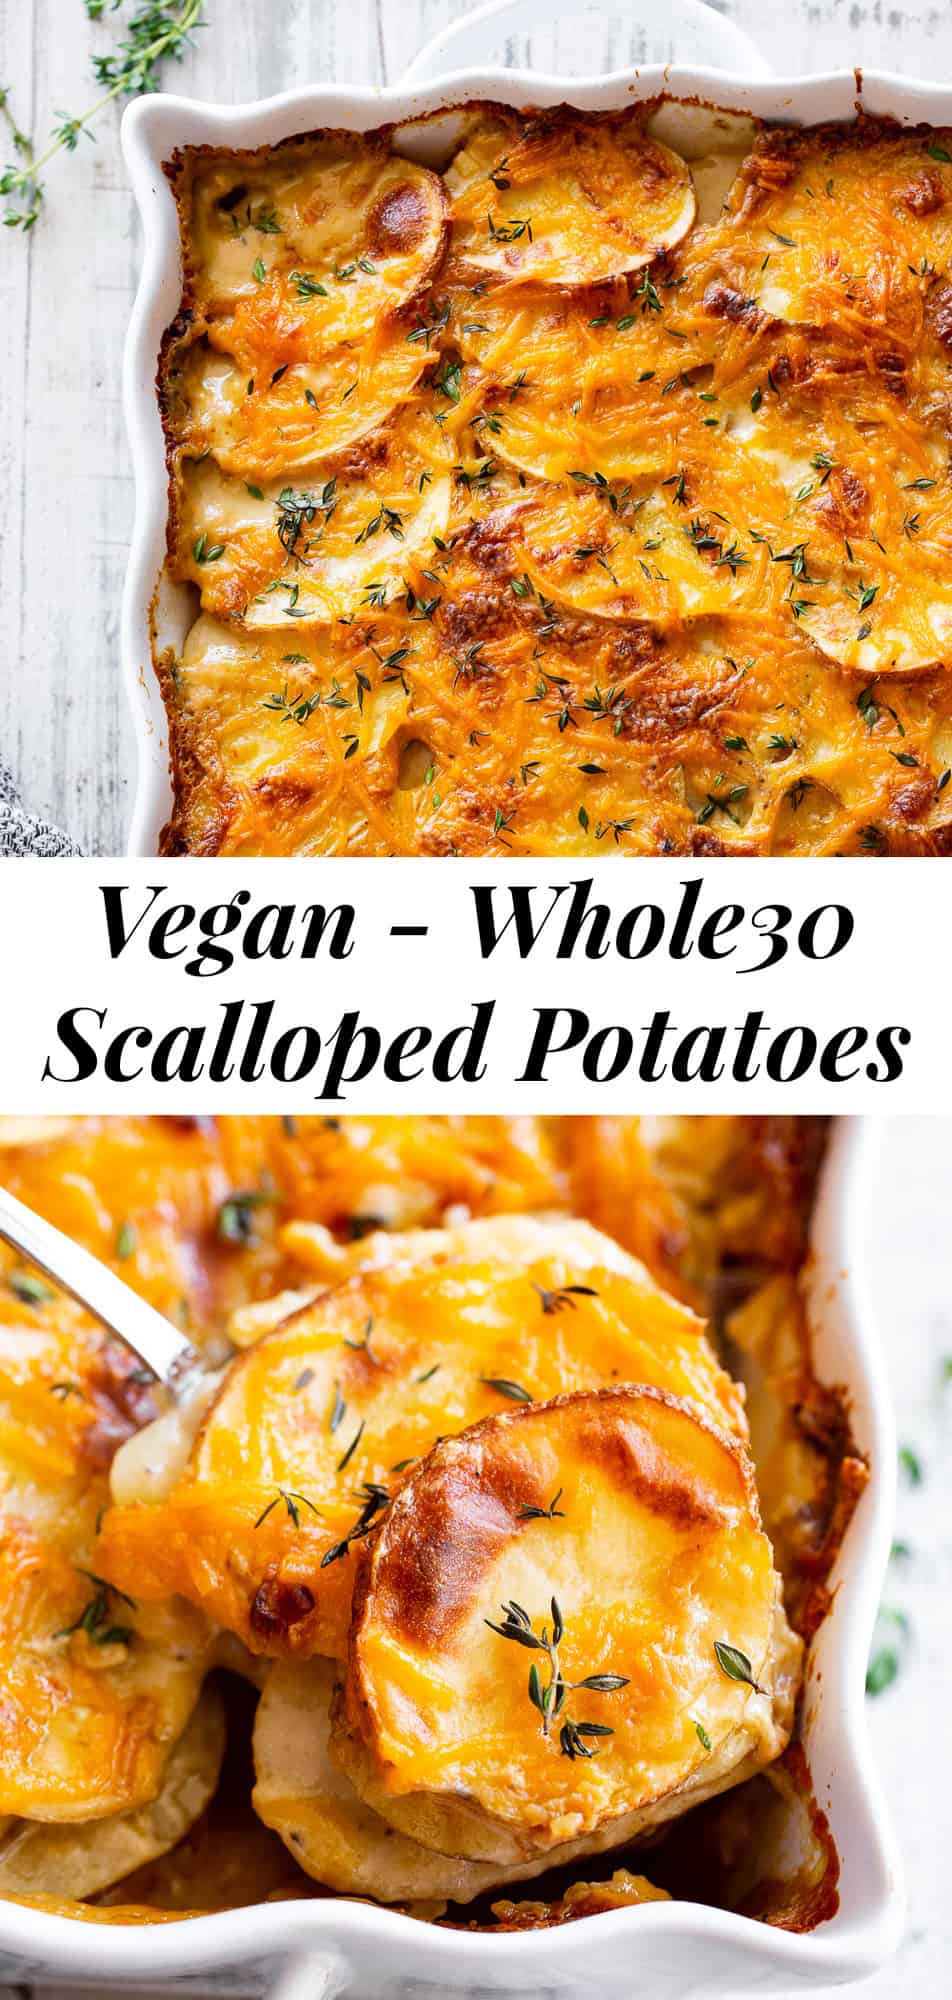 This healthier take on classic creamy, “cheesy” scalloped potatoes will become your new favorite side dish! Packed with garlic and fresh herbs, “buttery” flavor, a creamy dairy free sauce and optional vegan cheese, these scalloped potatoes are a dream! Paleo friendly with Whole30 and vegan options. #paleo #whole30 #potatoes #vegan #dairyfree